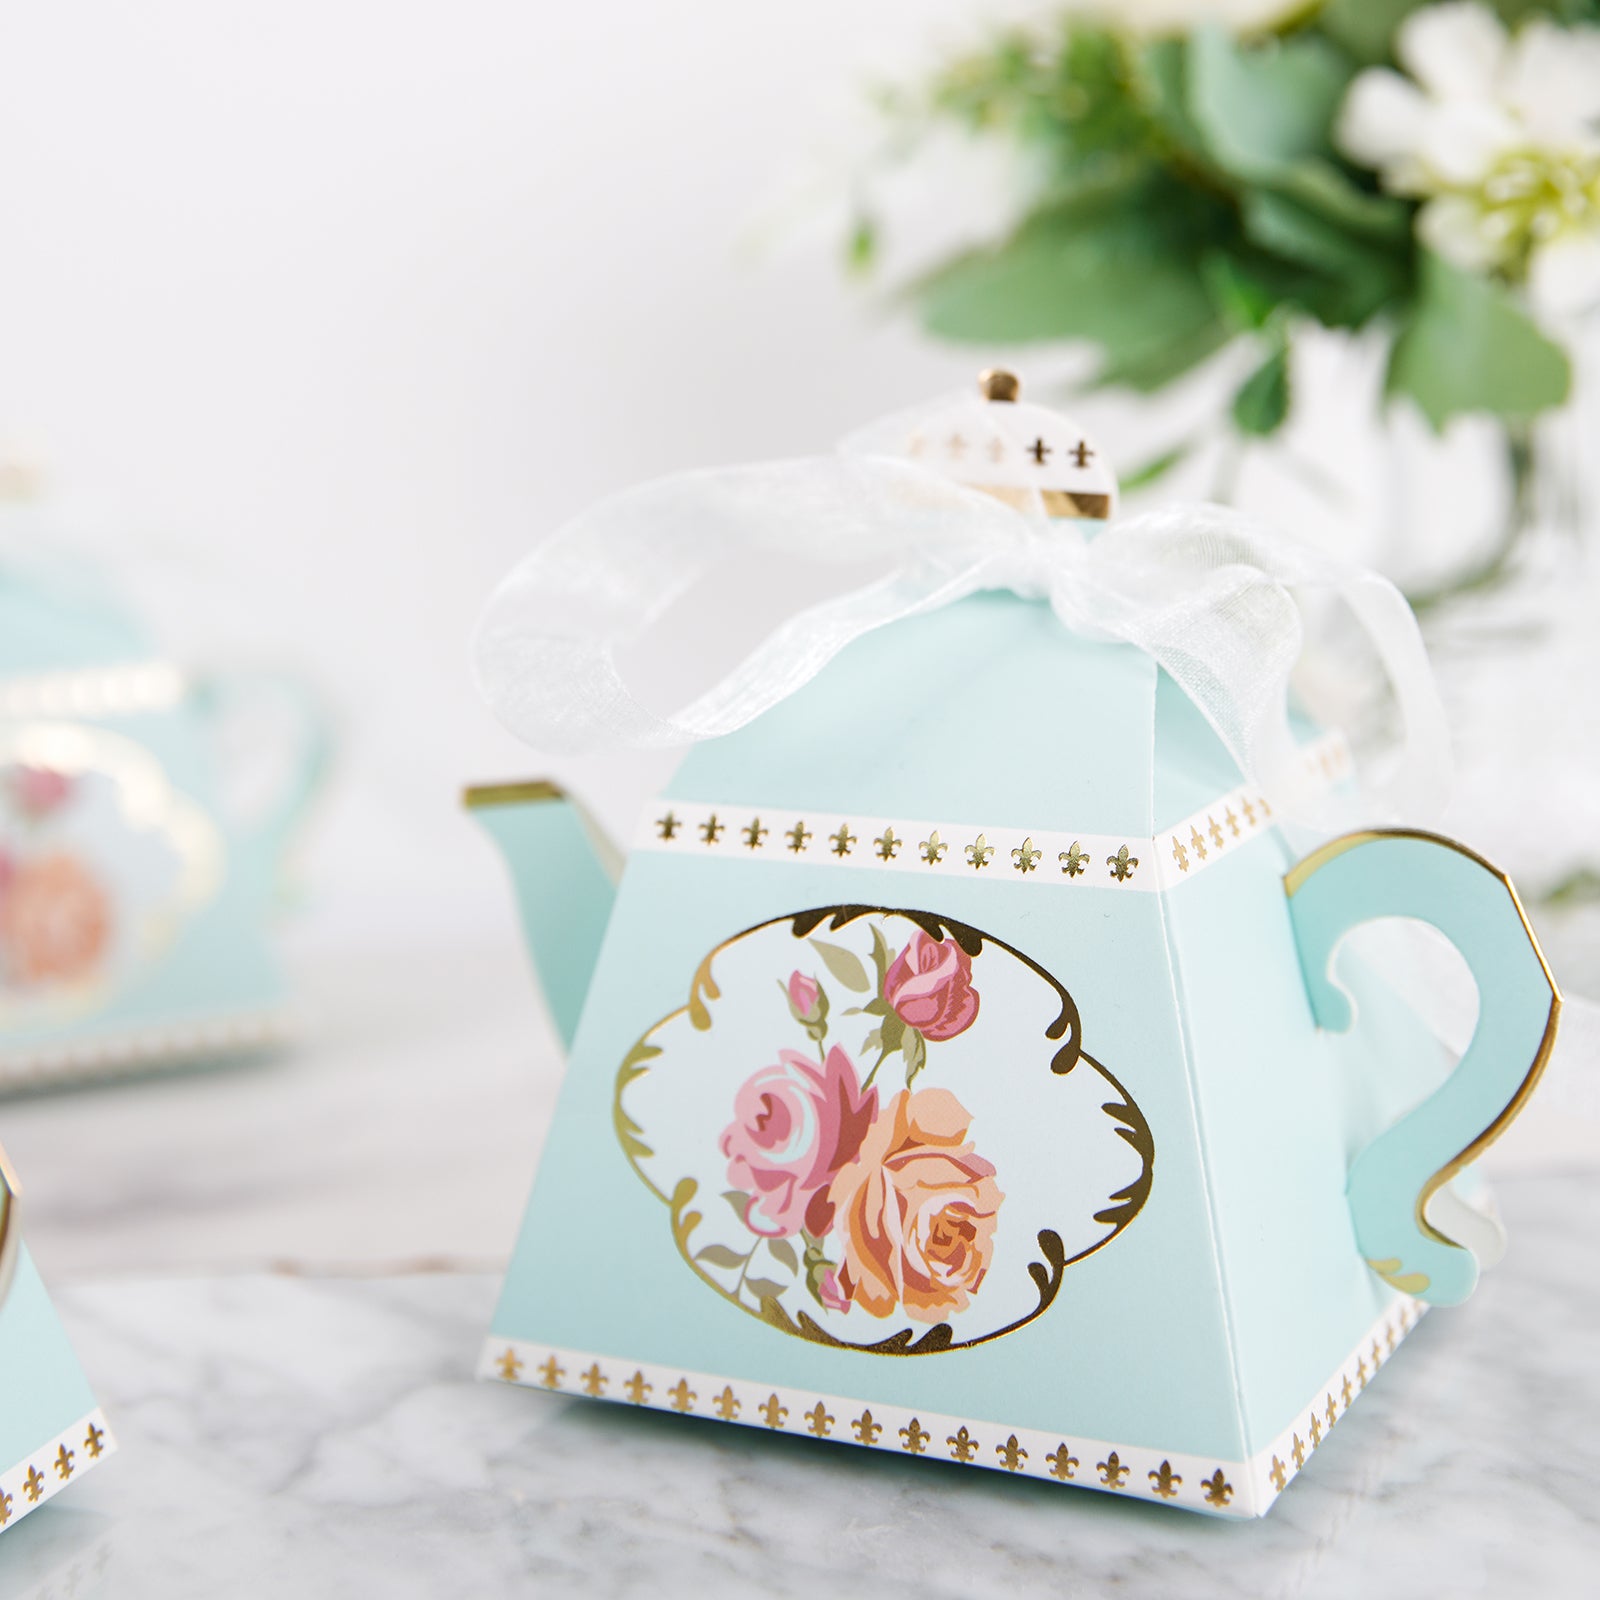 Candy Boxes Teapot Party Favors Alice in Wonderland Party Decor